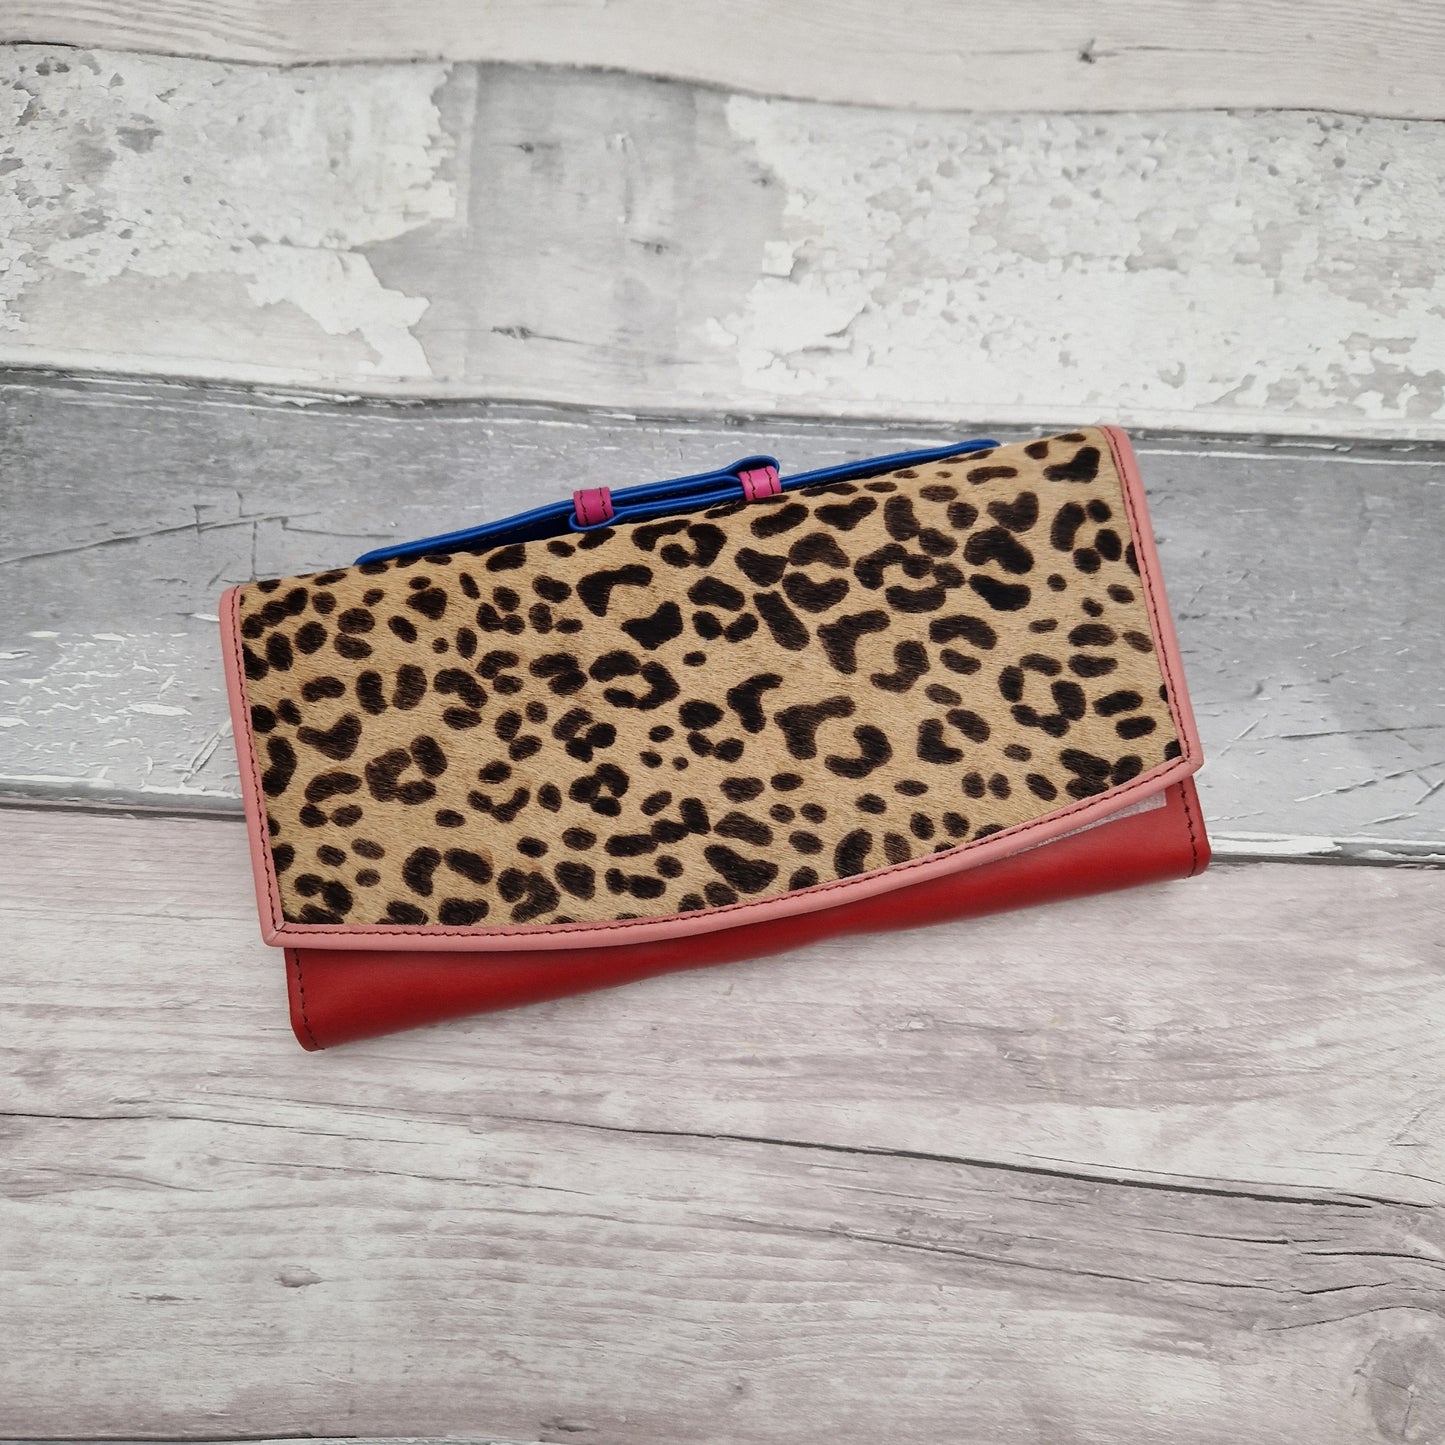 Red leather purse with a leopard print textured panel.